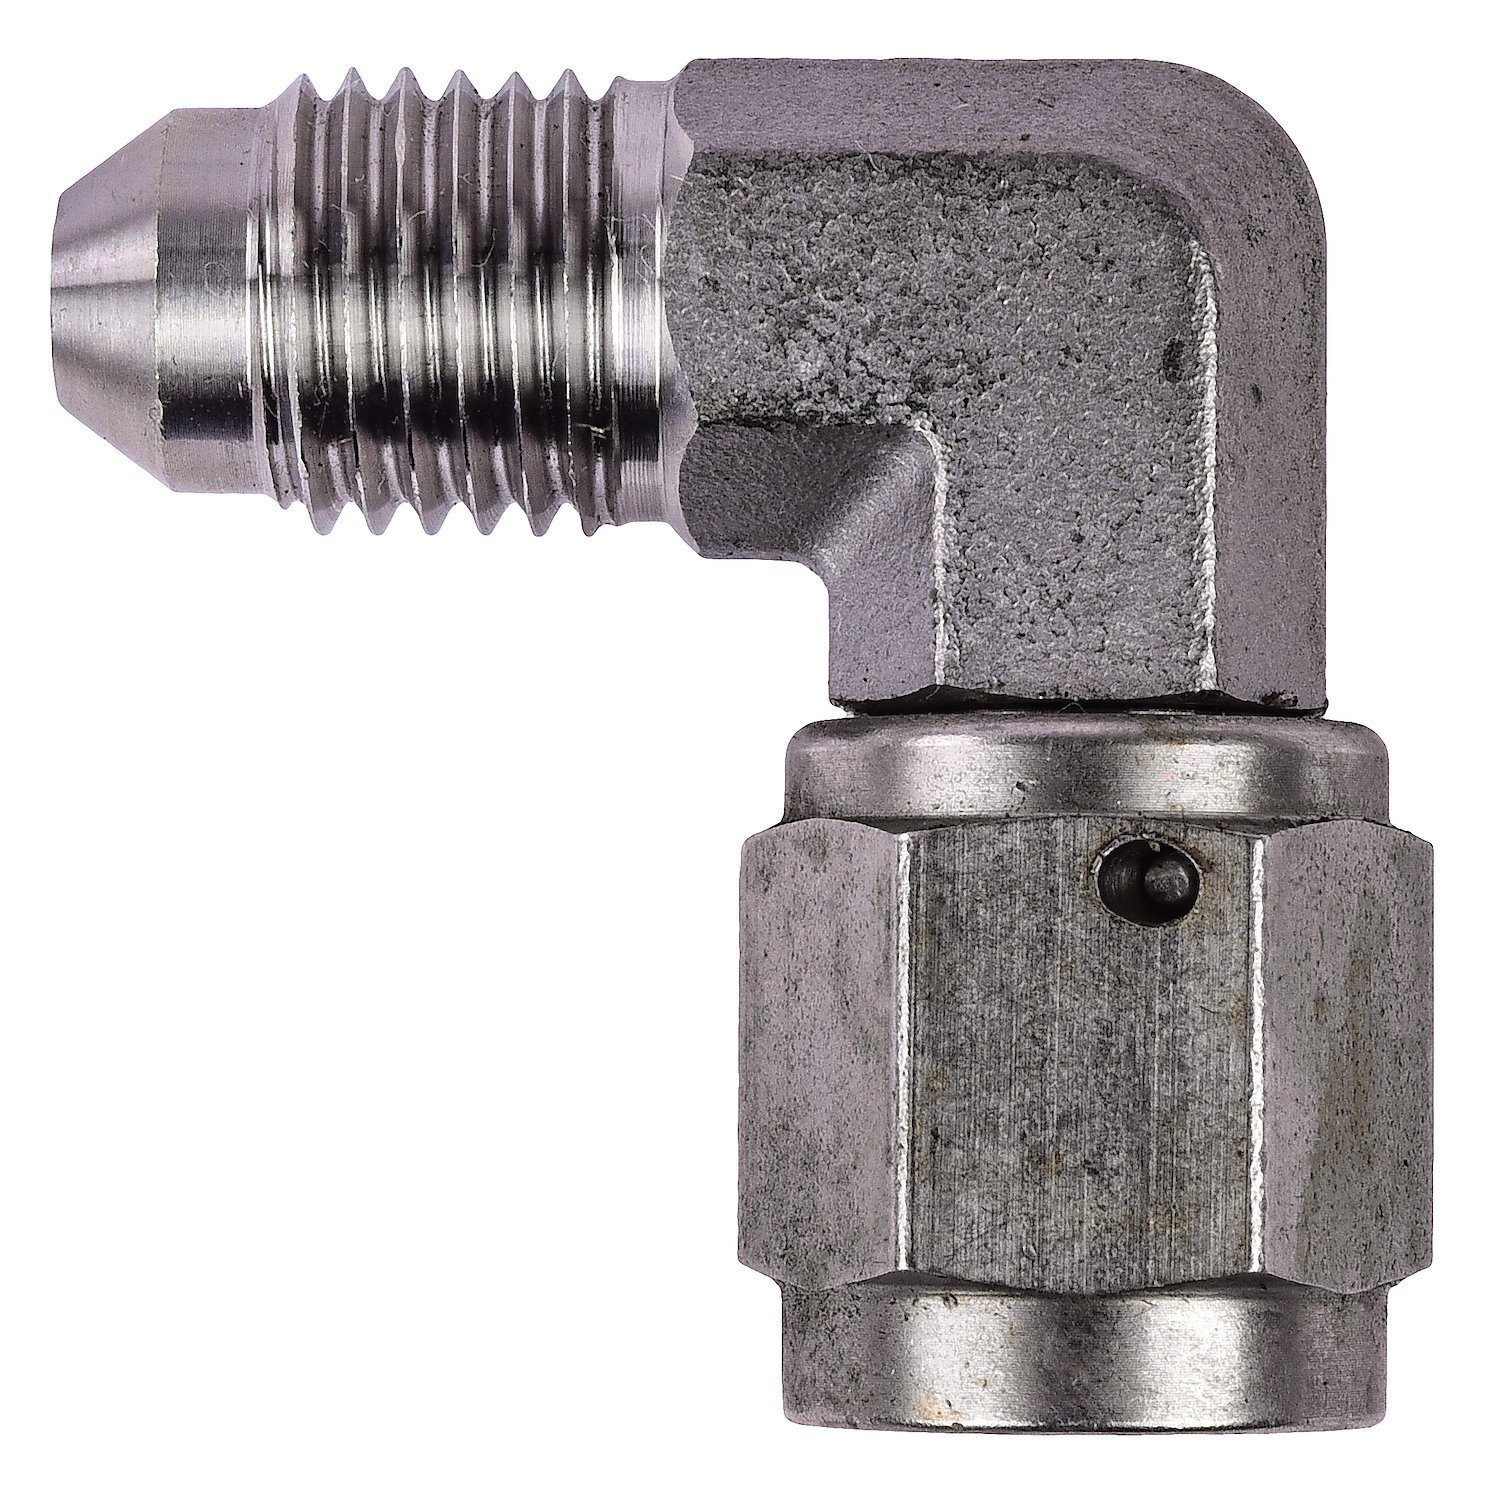 AN Female to AN Male 90 degree Union Fitting [-4 AN Female Swivel to -4 AN Male, Stainless Steel]